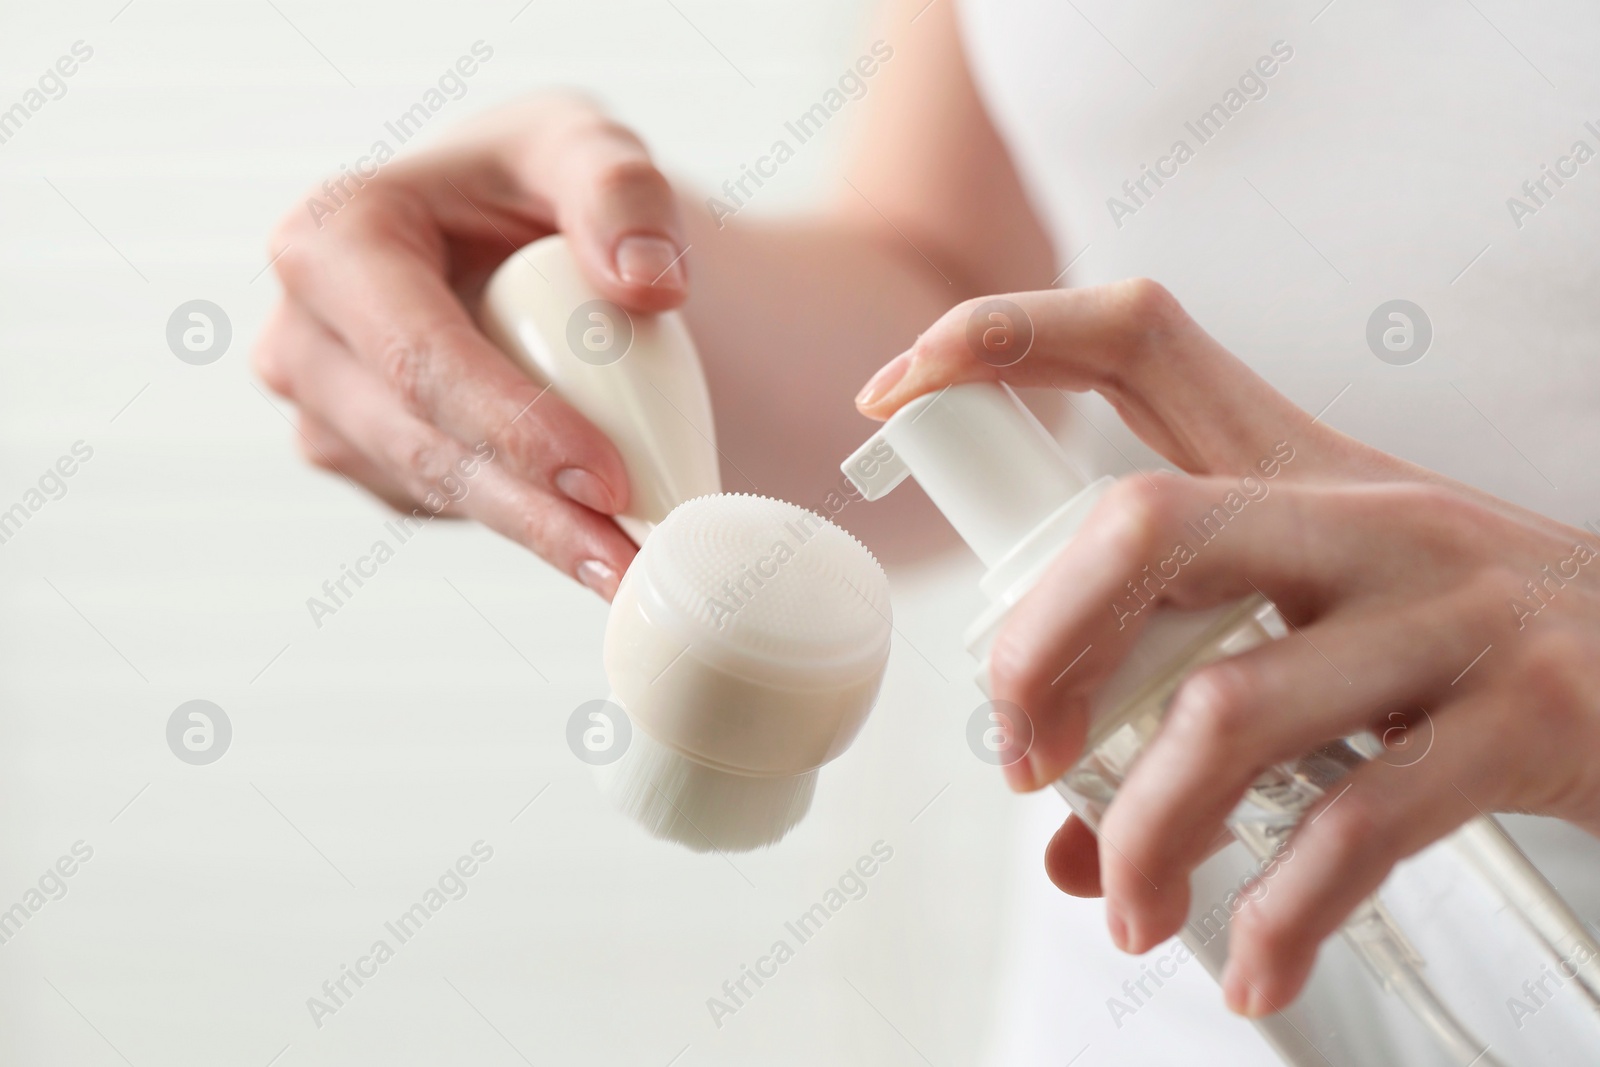 Photo of Washing face. Woman applying cleansing foam onto brush against light background, closeup